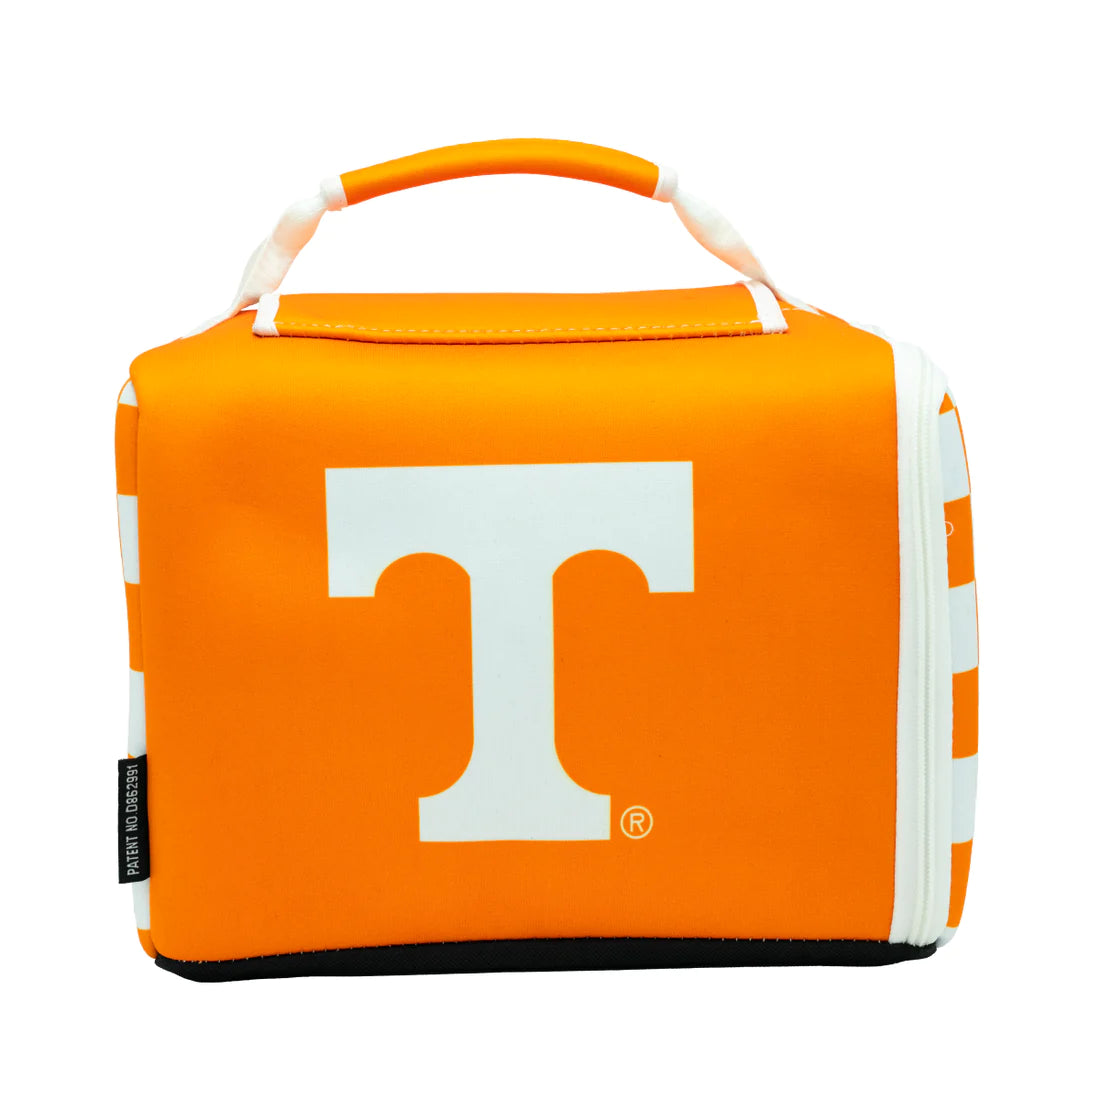 University of Tennessee Knoxville 12-Pack Kase Mate